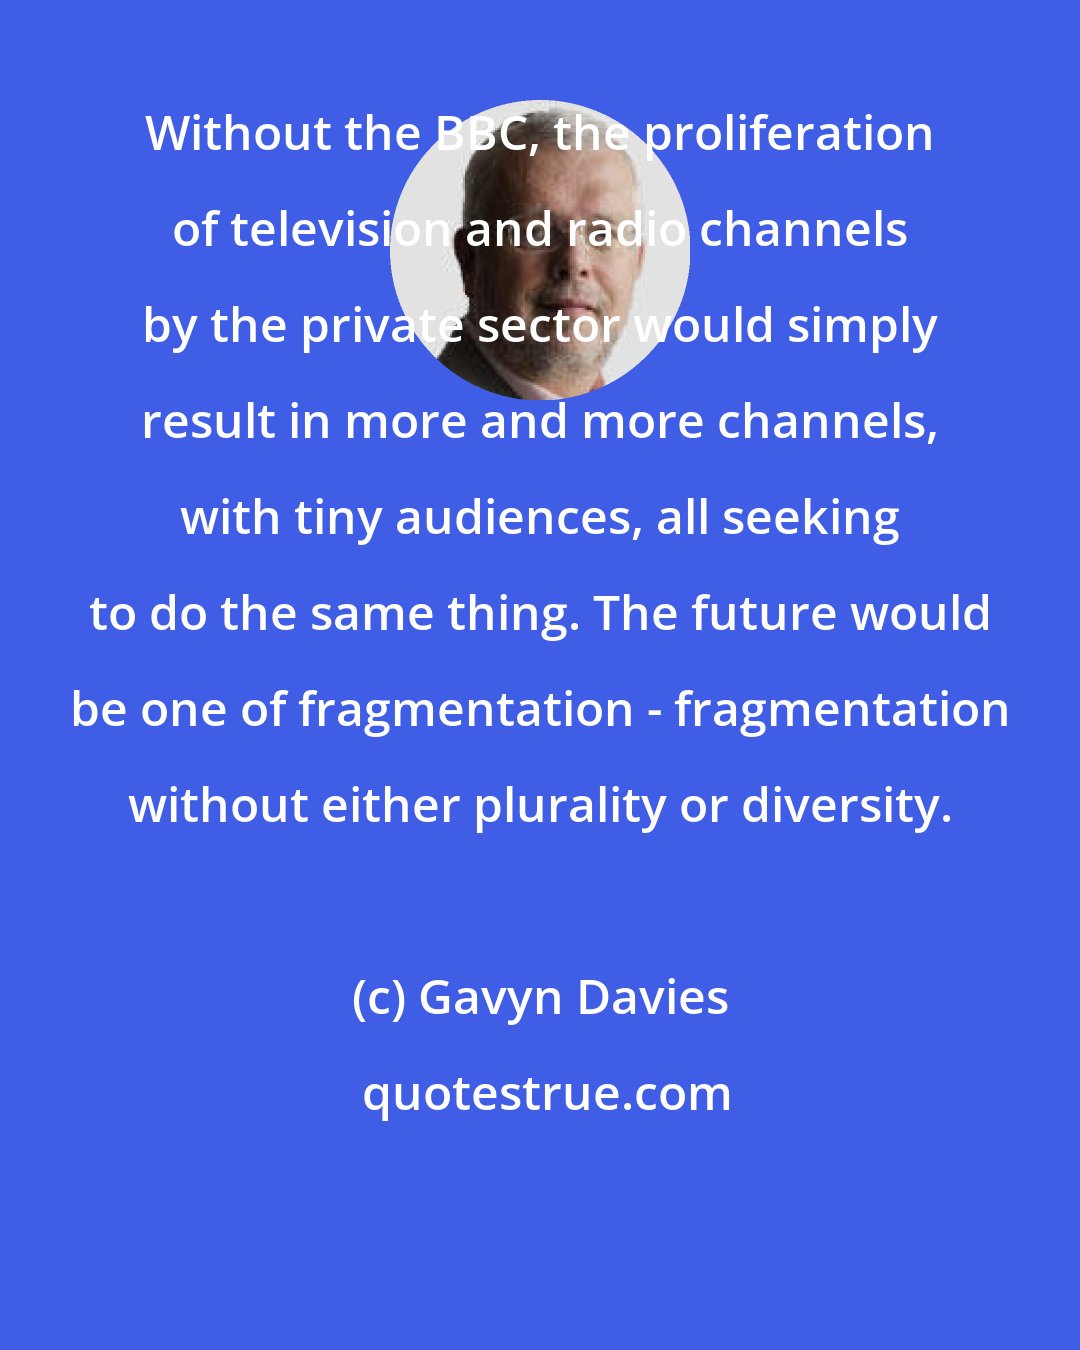 Gavyn Davies: Without the BBC, the proliferation of television and radio channels by the private sector would simply result in more and more channels, with tiny audiences, all seeking to do the same thing. The future would be one of fragmentation - fragmentation without either plurality or diversity.